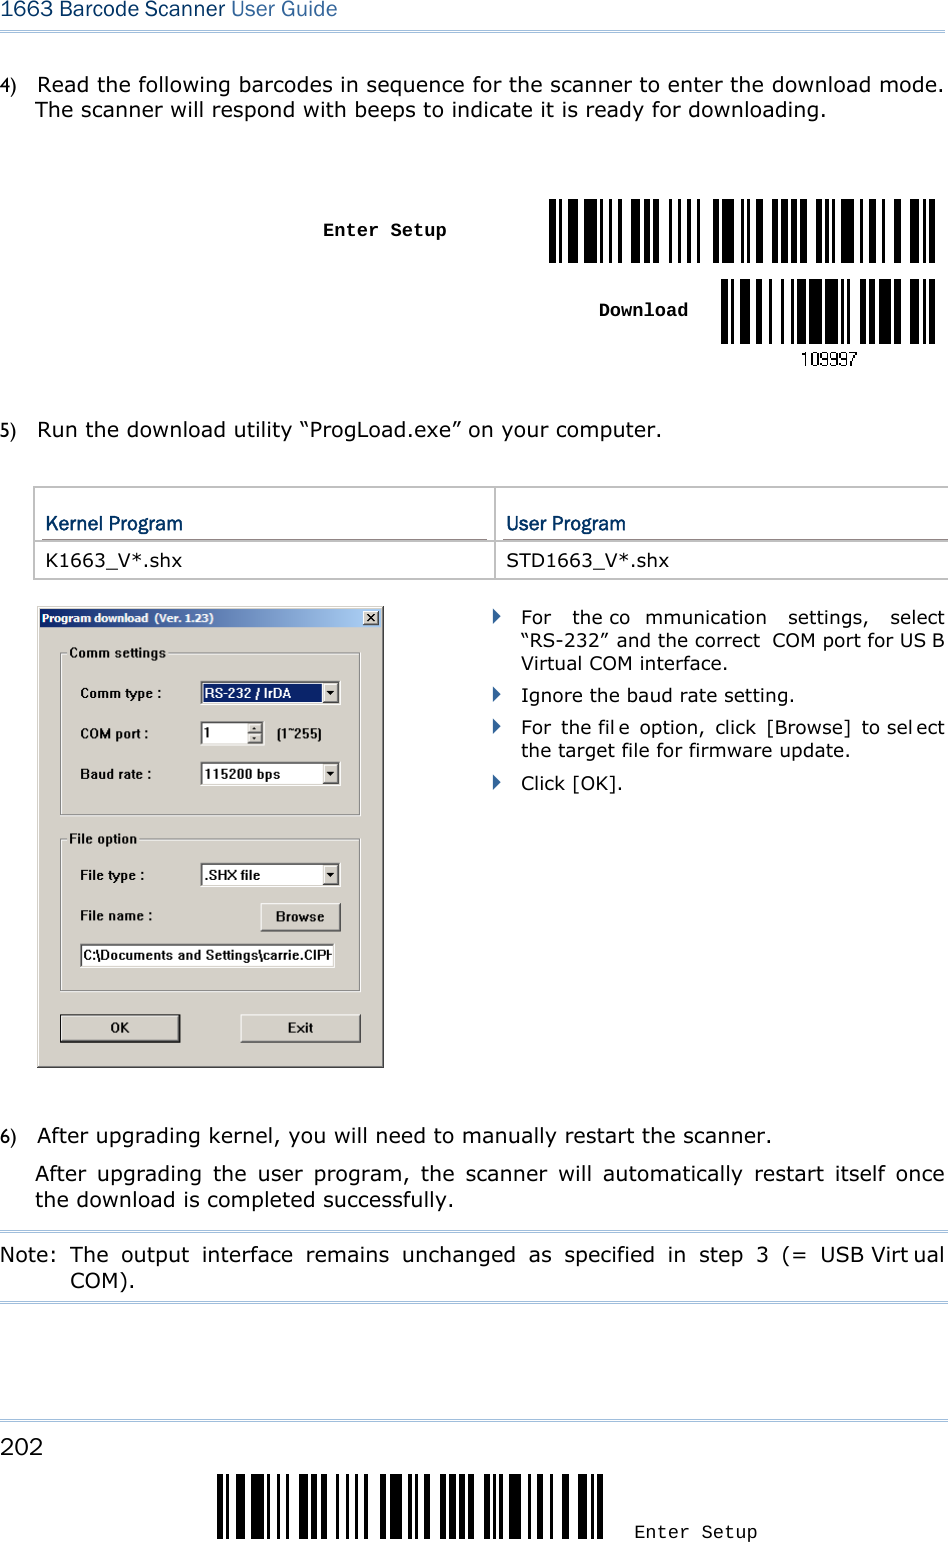 202 Enter Setup 1663 Barcode Scanner User Guide  4) Read the following barcodes in sequence for the scanner to enter the download mode. The scanner will respond with beeps to indicate it is ready for downloading.   Enter SetupDownload 5) Run the download utility “ProgLoad.exe” on your computer.    Kernel Program  User Program K1663_V*.shx STD1663_V*.shx         For the co mmunication settings, select “RS-232” and the correct  COM port for US B Virtual COM interface.  Ignore the baud rate setting.  For the fil e option, click [Browse] to sel ect the target file for firmware update.    Click [OK].    6) After upgrading kernel, you will need to manually restart the scanner.           After upgrading the user program, the scanner will automatically restart itself once the download is completed successfully.   Note: The output interface remains unchanged as specified in step 3 (= USB Virt ual COM).     